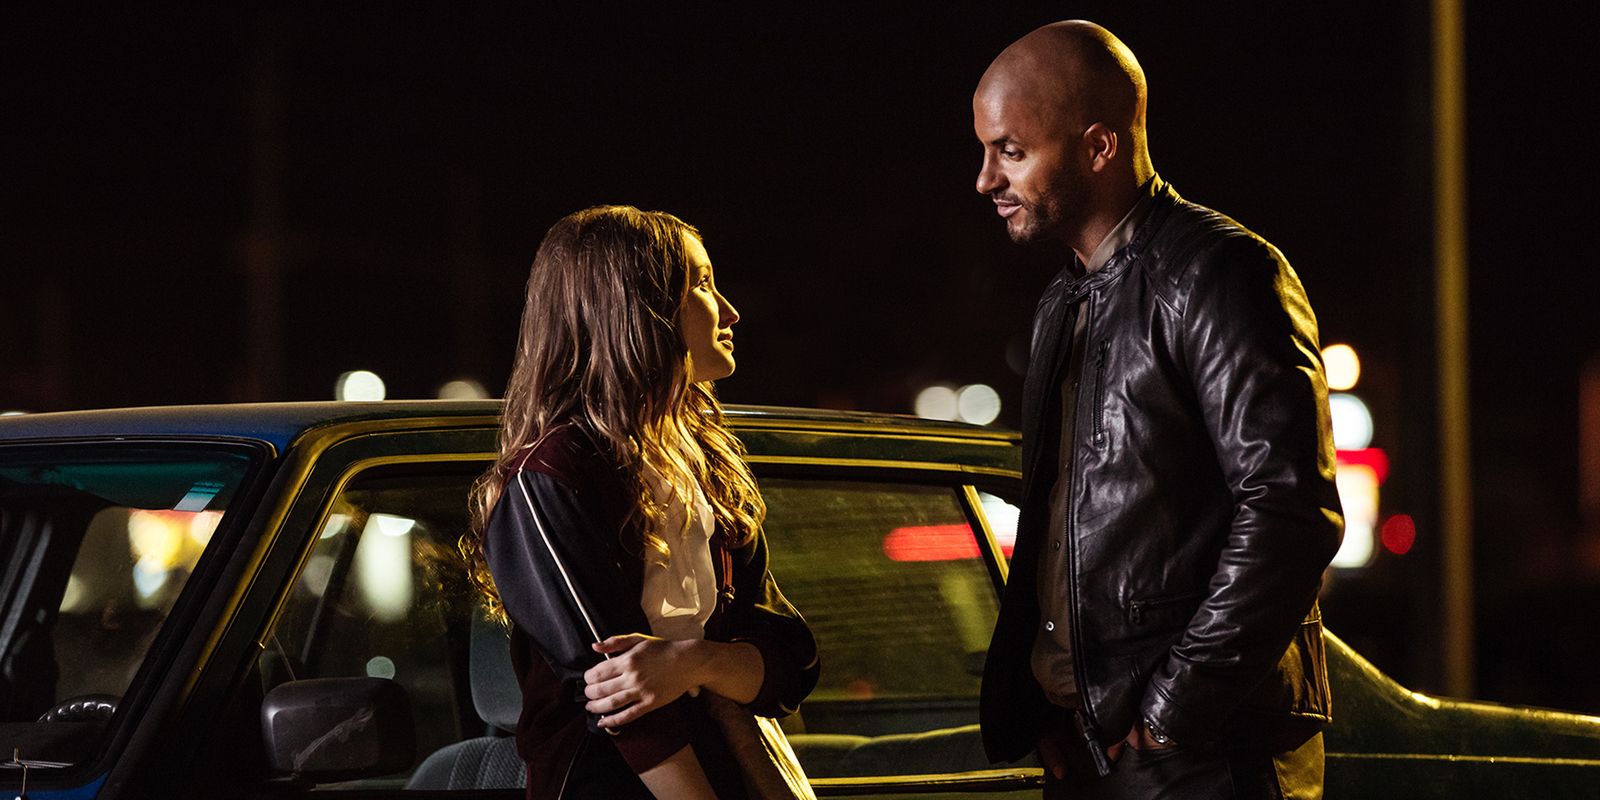 Emily Browning and Ricky Whittle in American Gods Episode 4